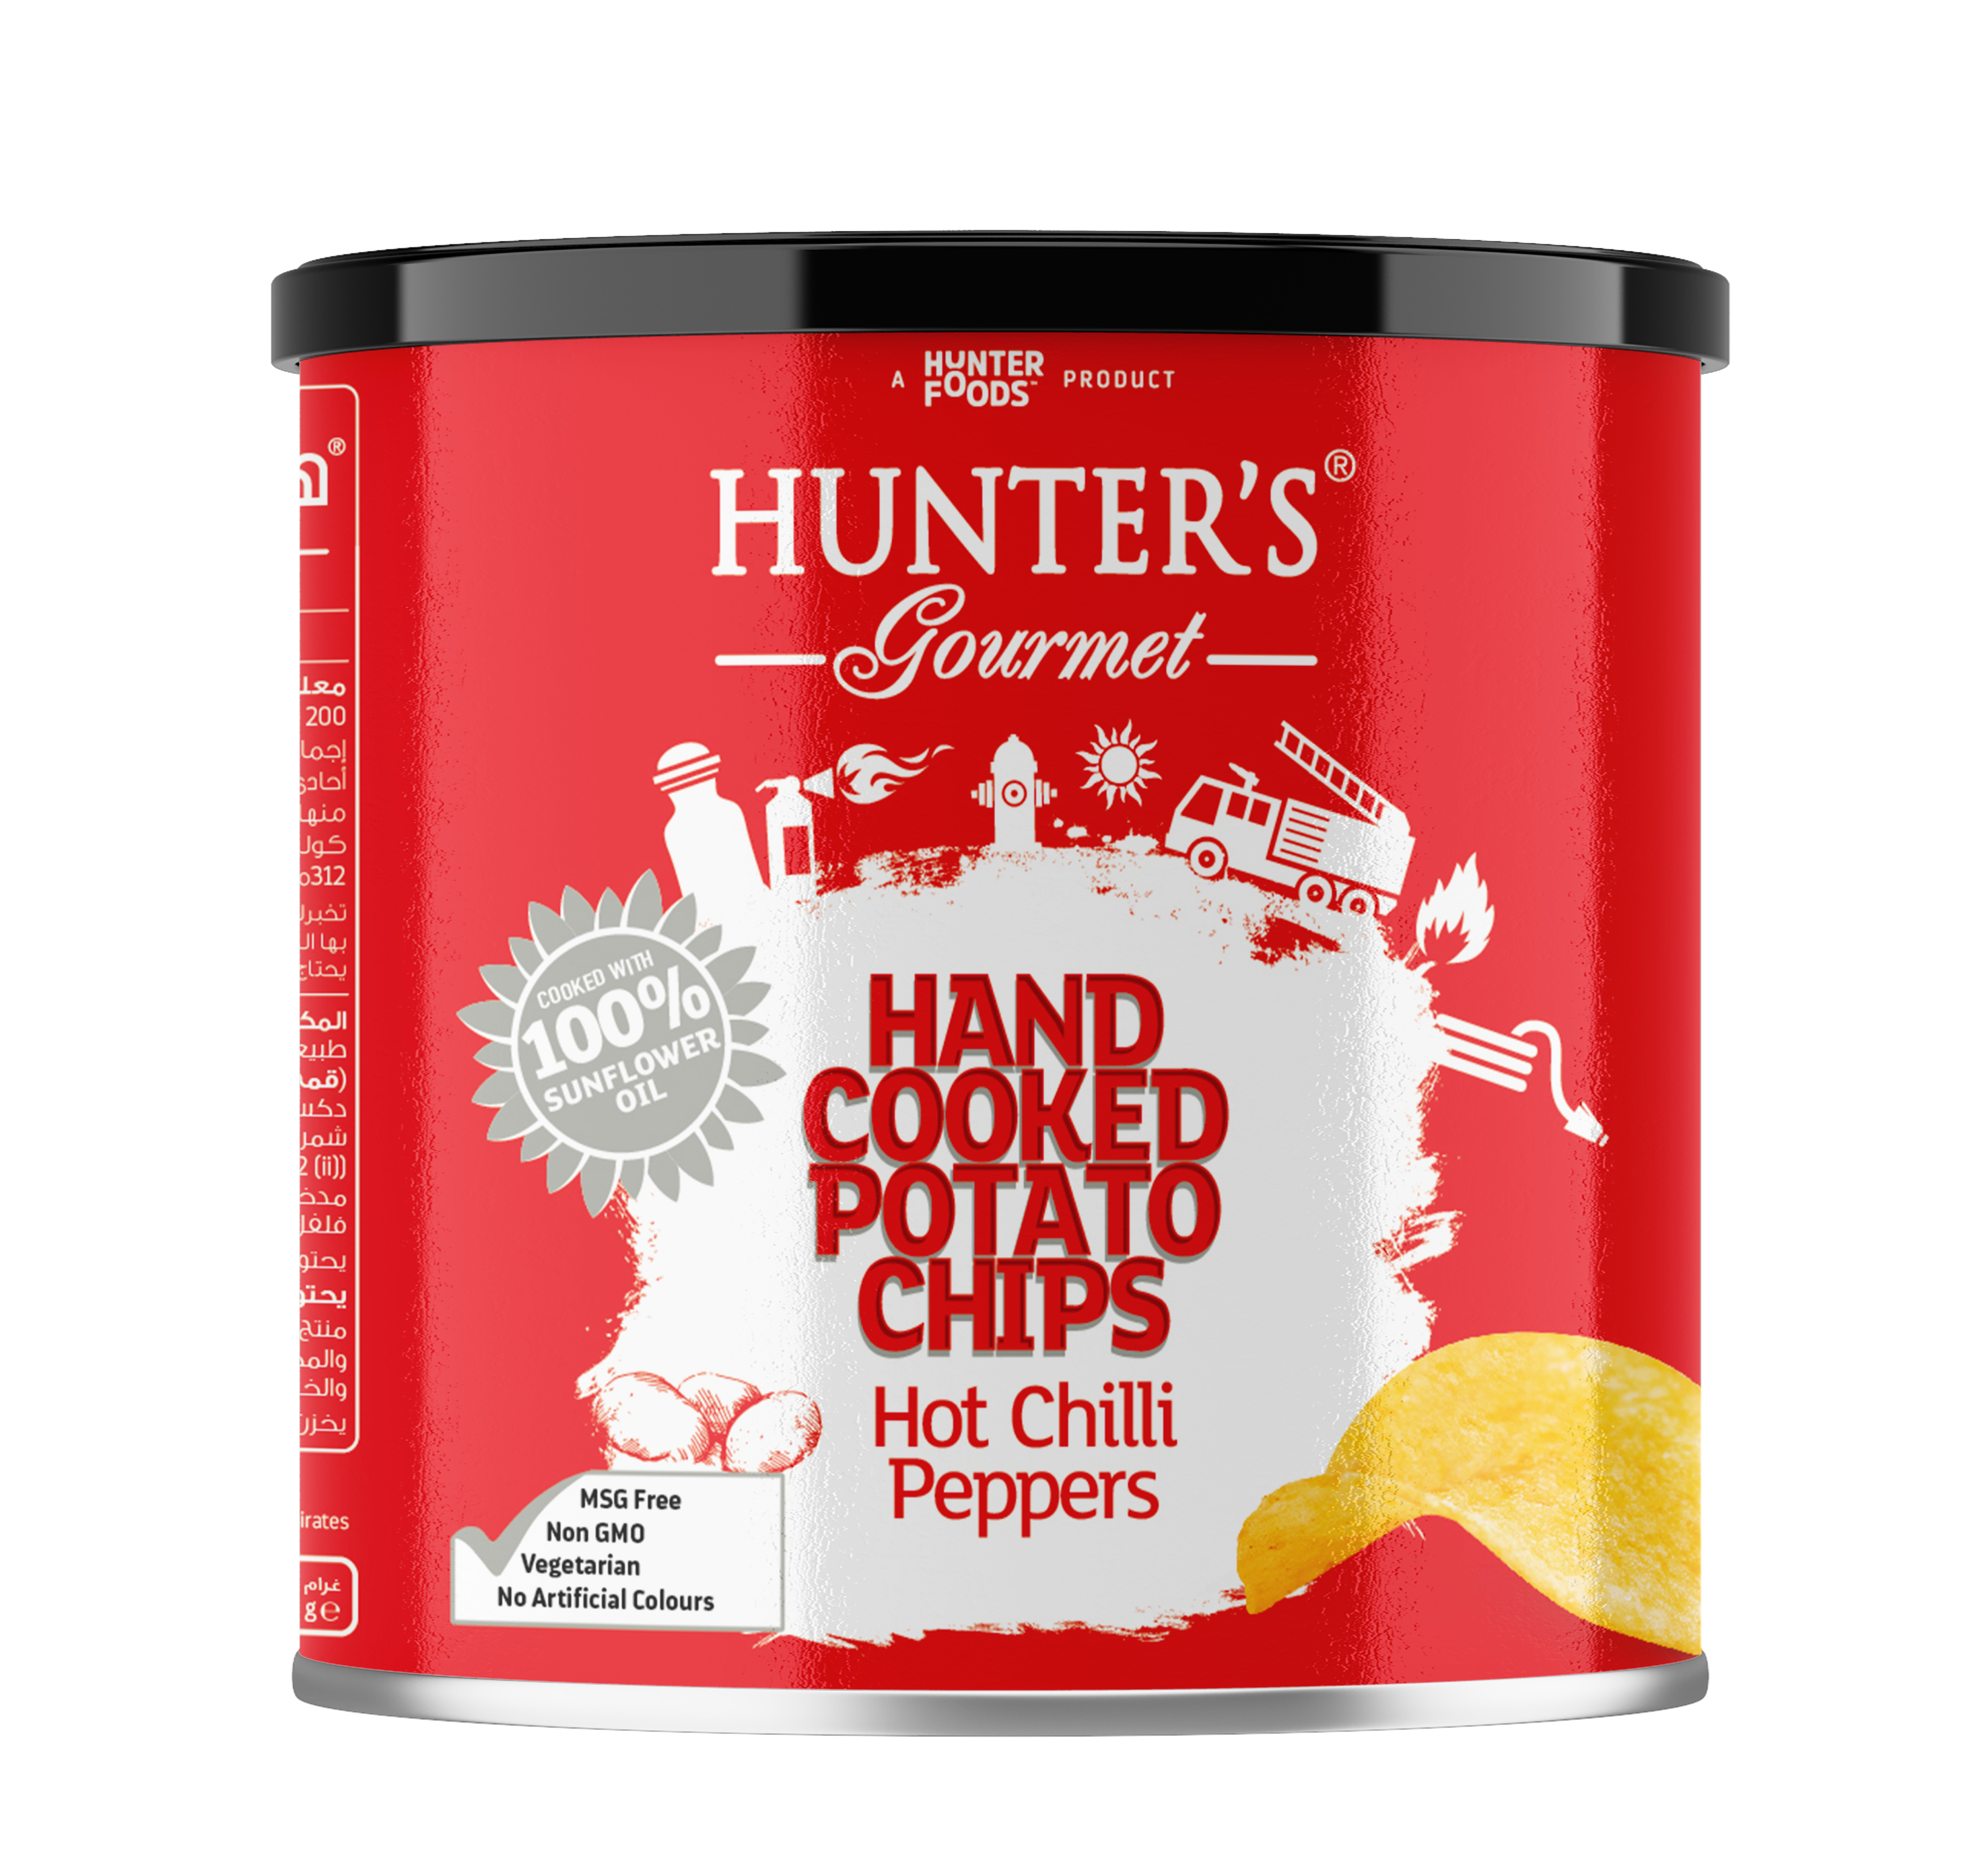 Hunter's Gourmet Hand Cooked Potato Chips Hot Chilli Peppers 50 units per case 40 g